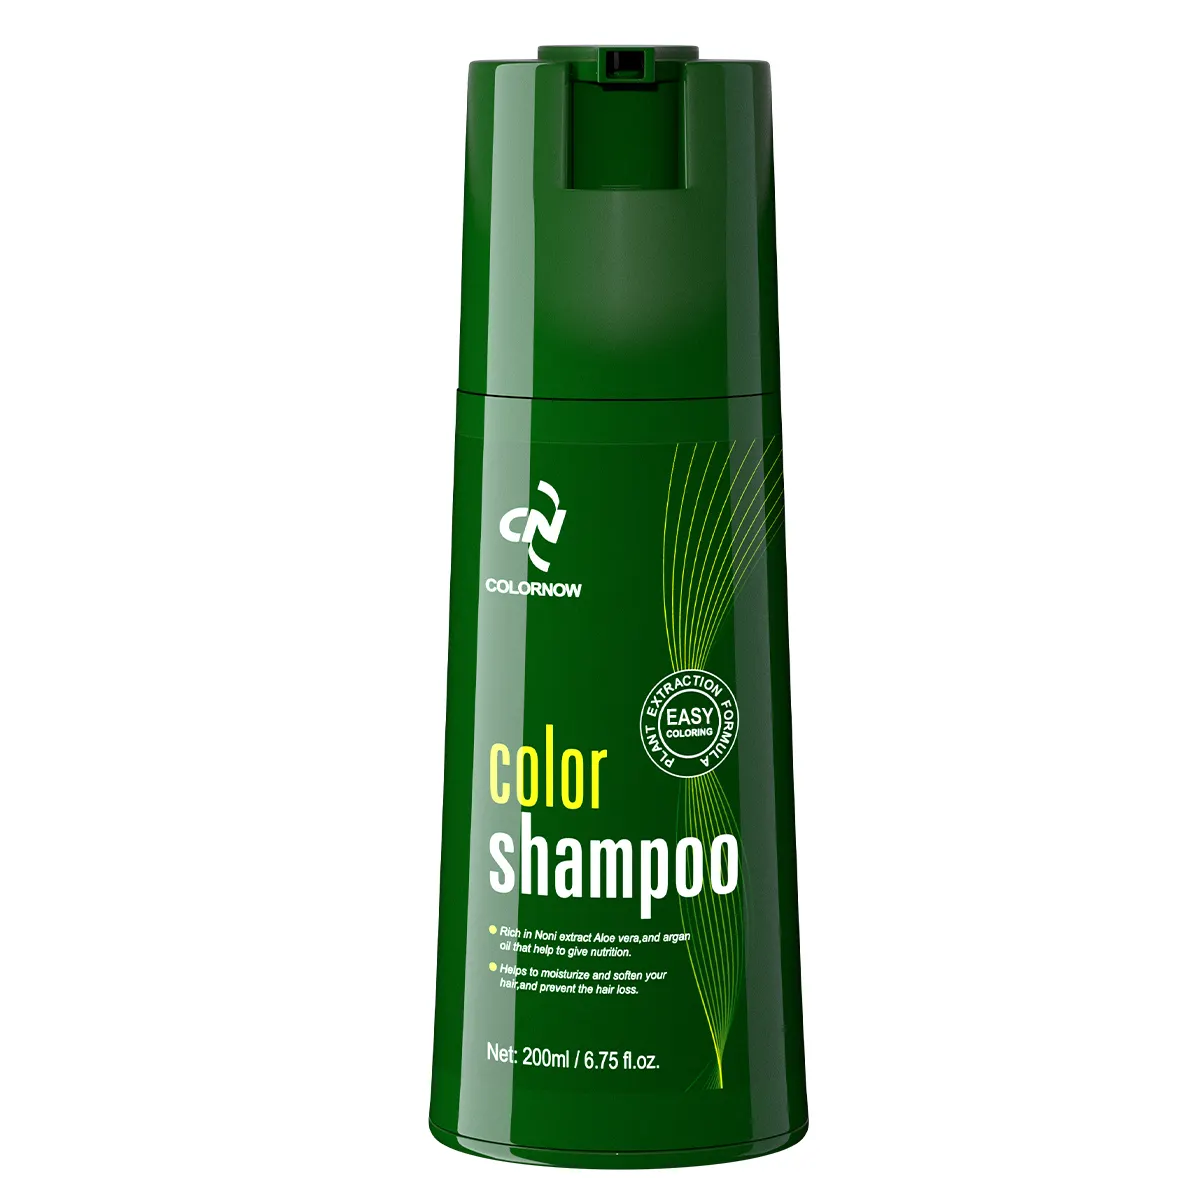 Chestnut brown hair color shampoo for grey hair coverage